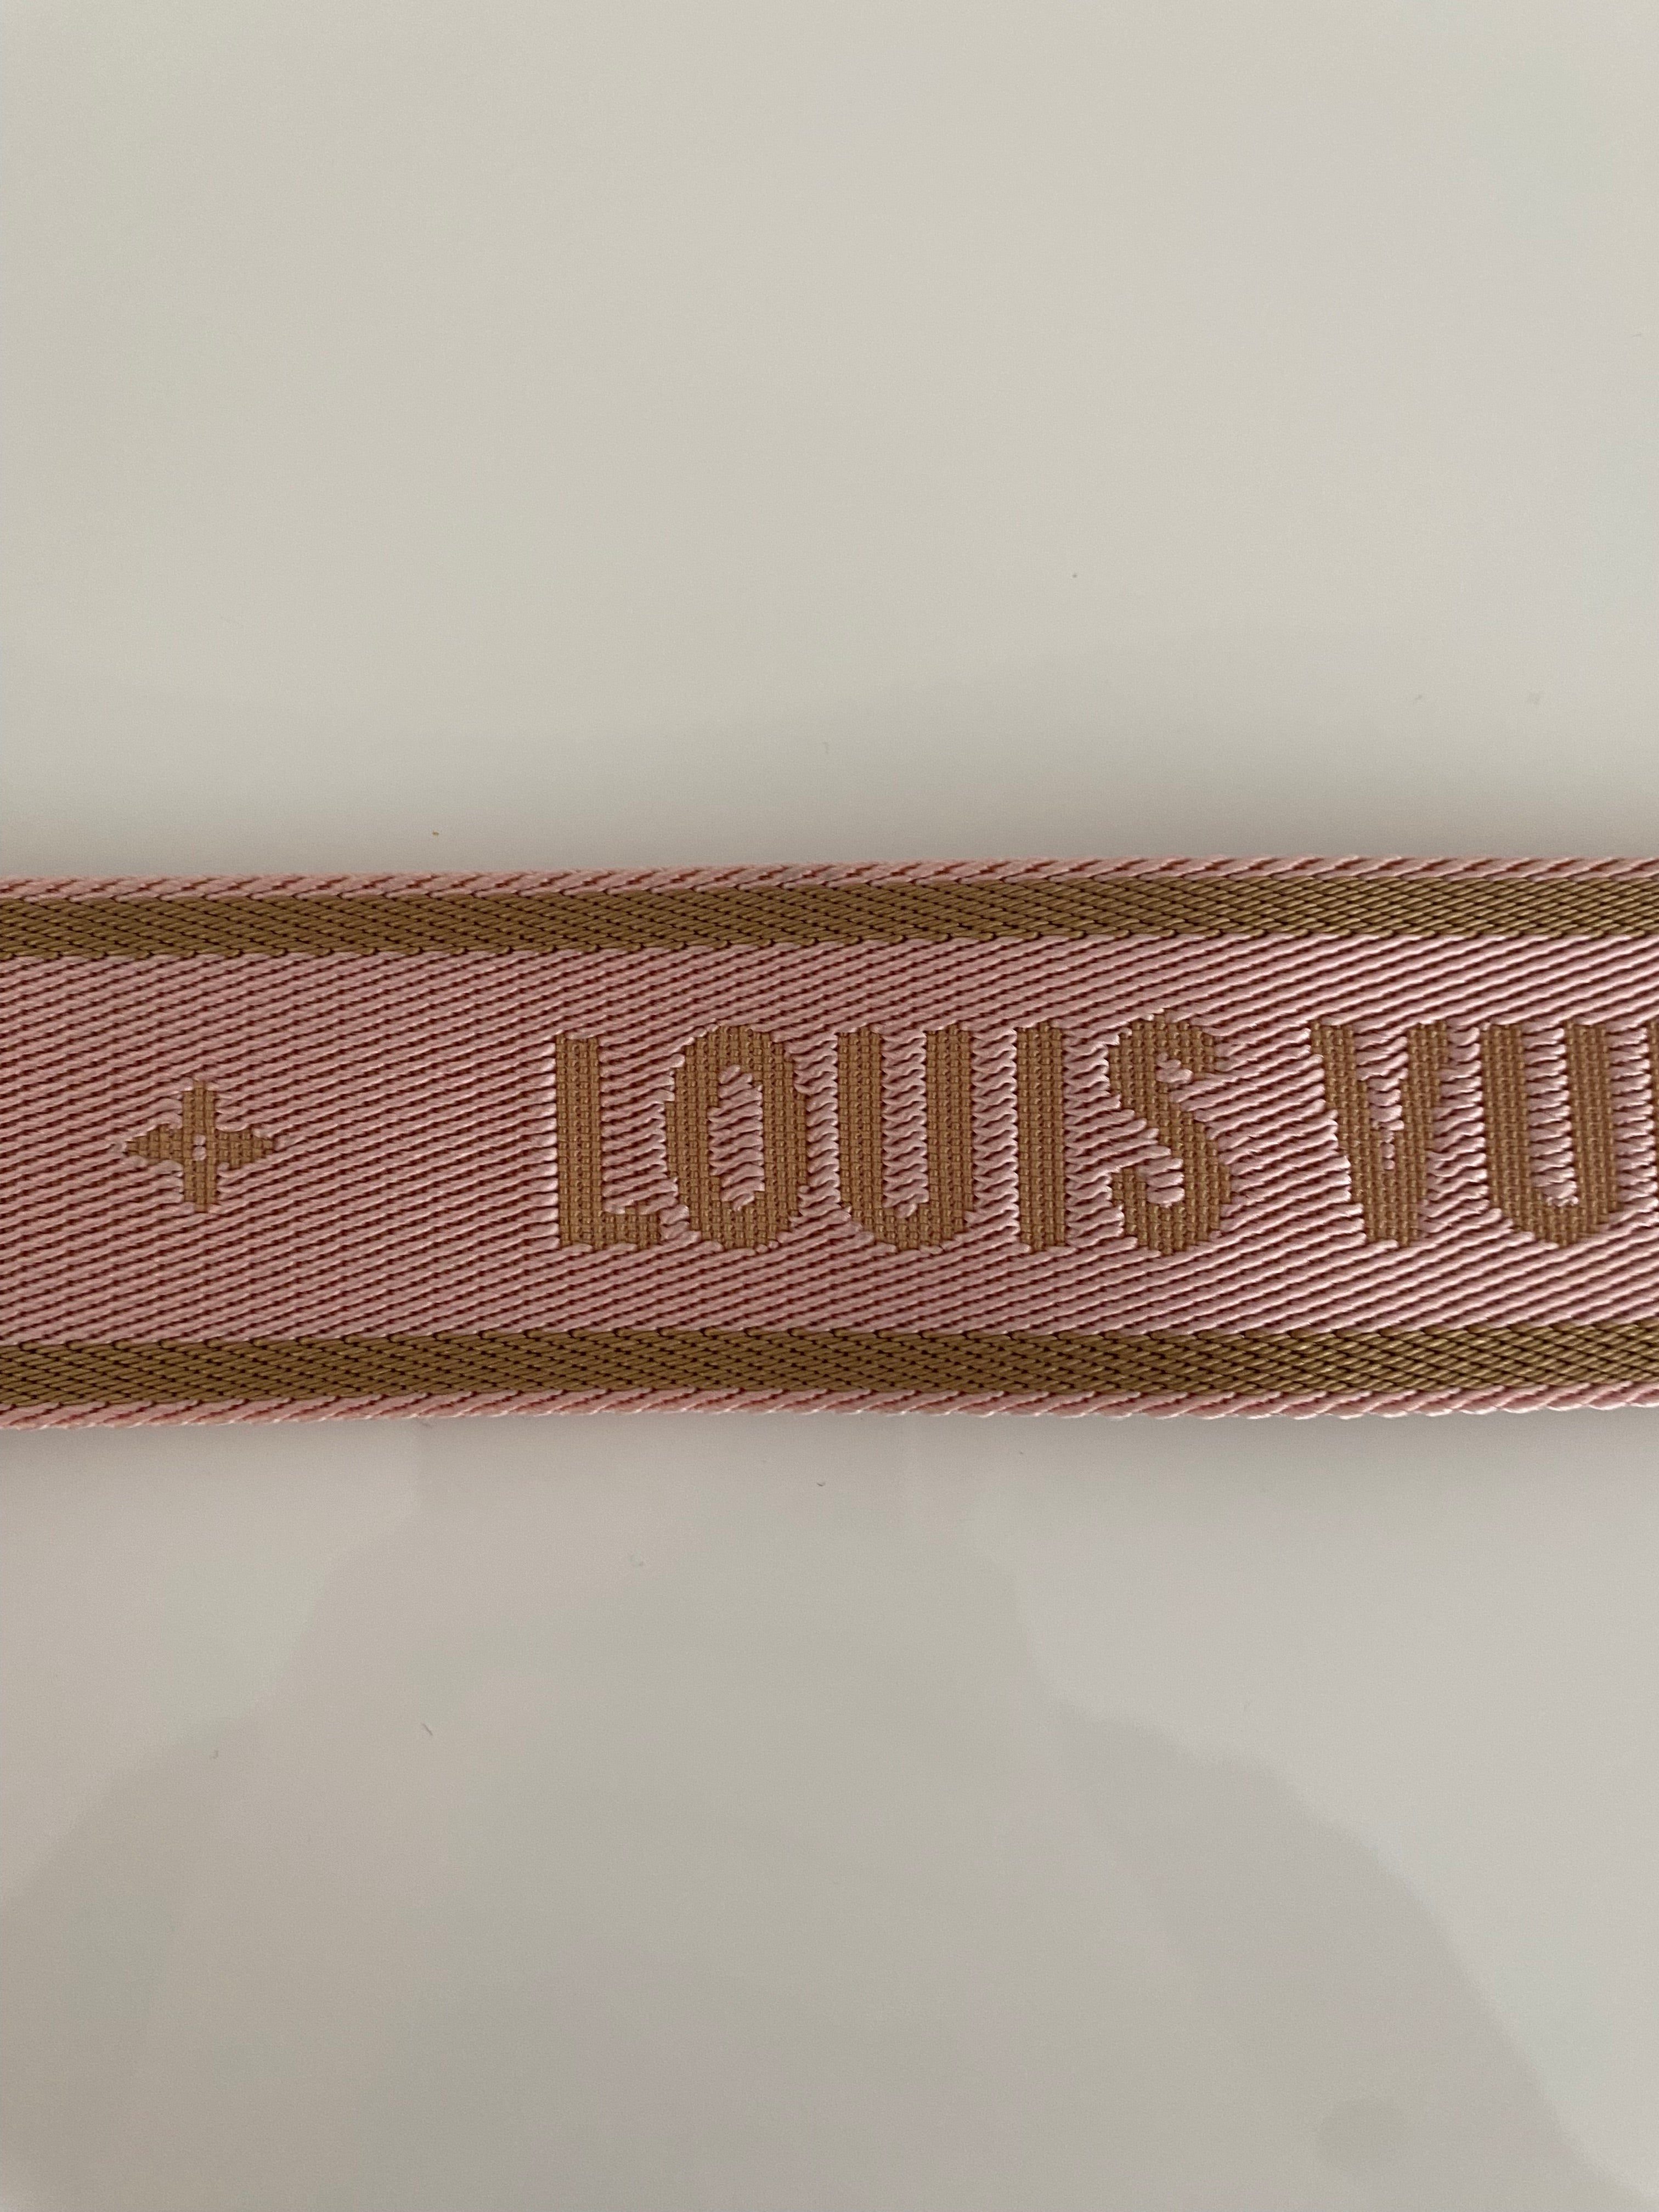 Louis Vuitton Multi Pochette review with DH Gate guide to ordering